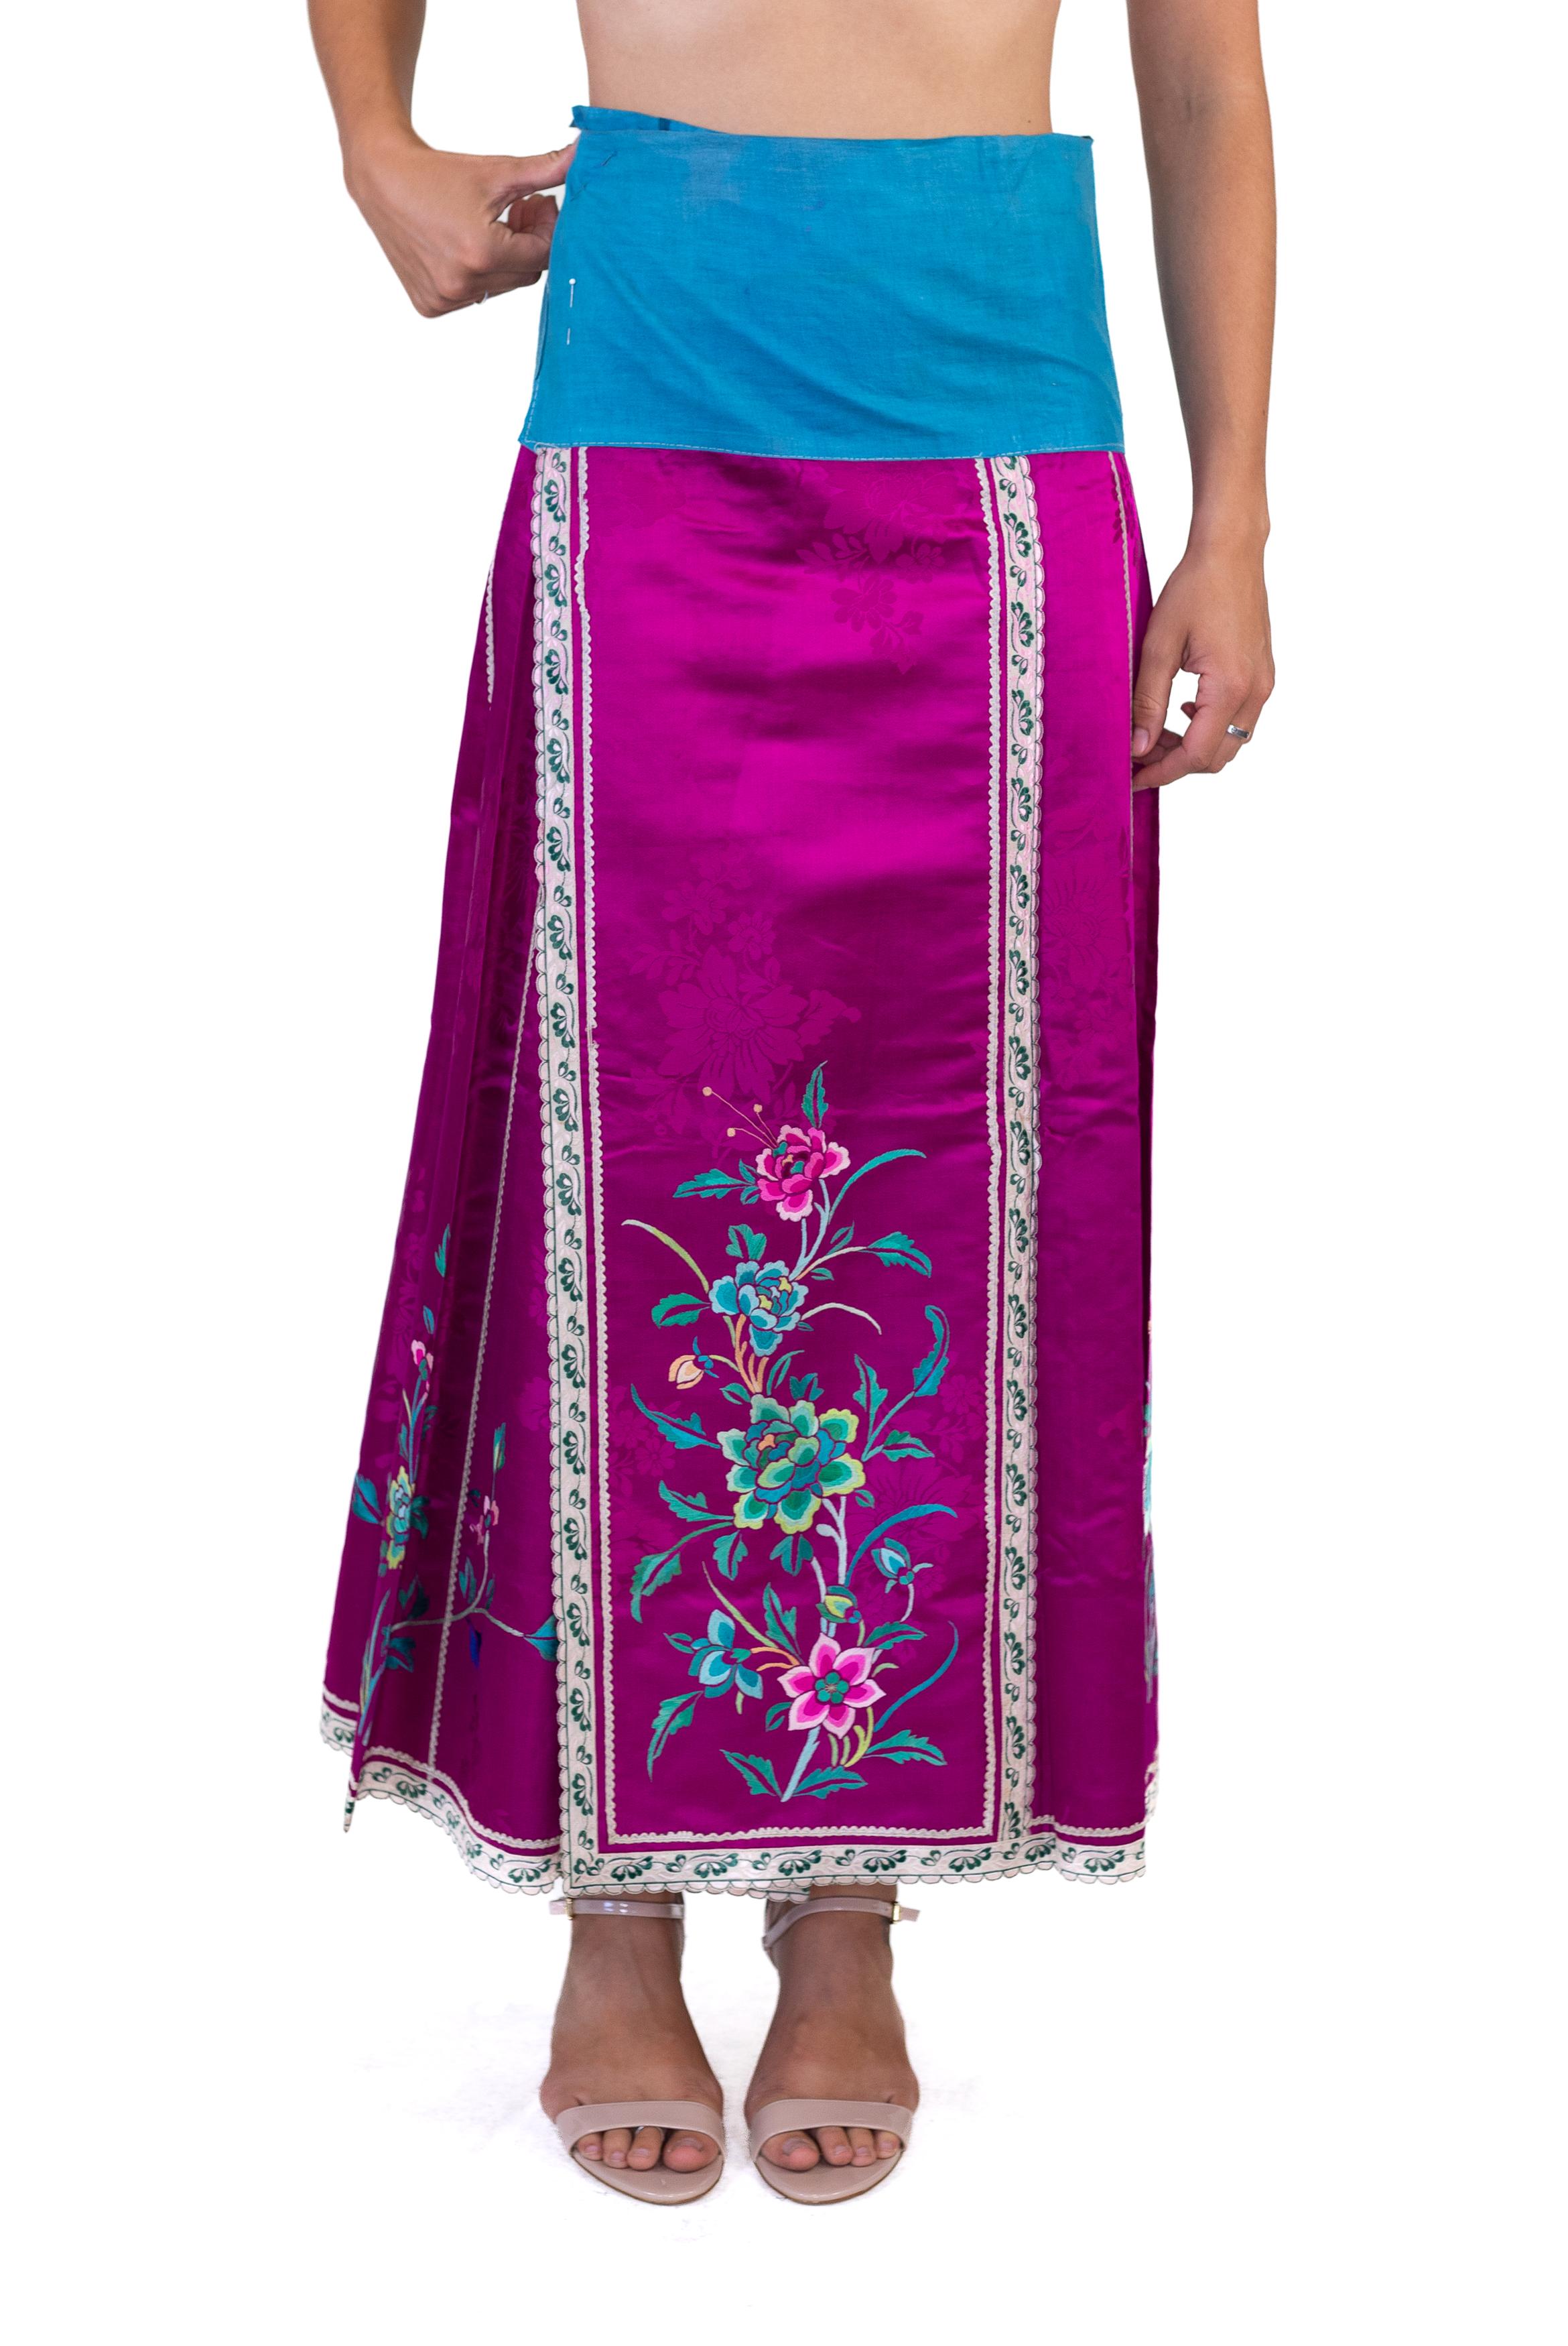 Women's Victorian Fuchia Hand Embroidered Silk Jacquard Chinese Wrap Skirt For Sale